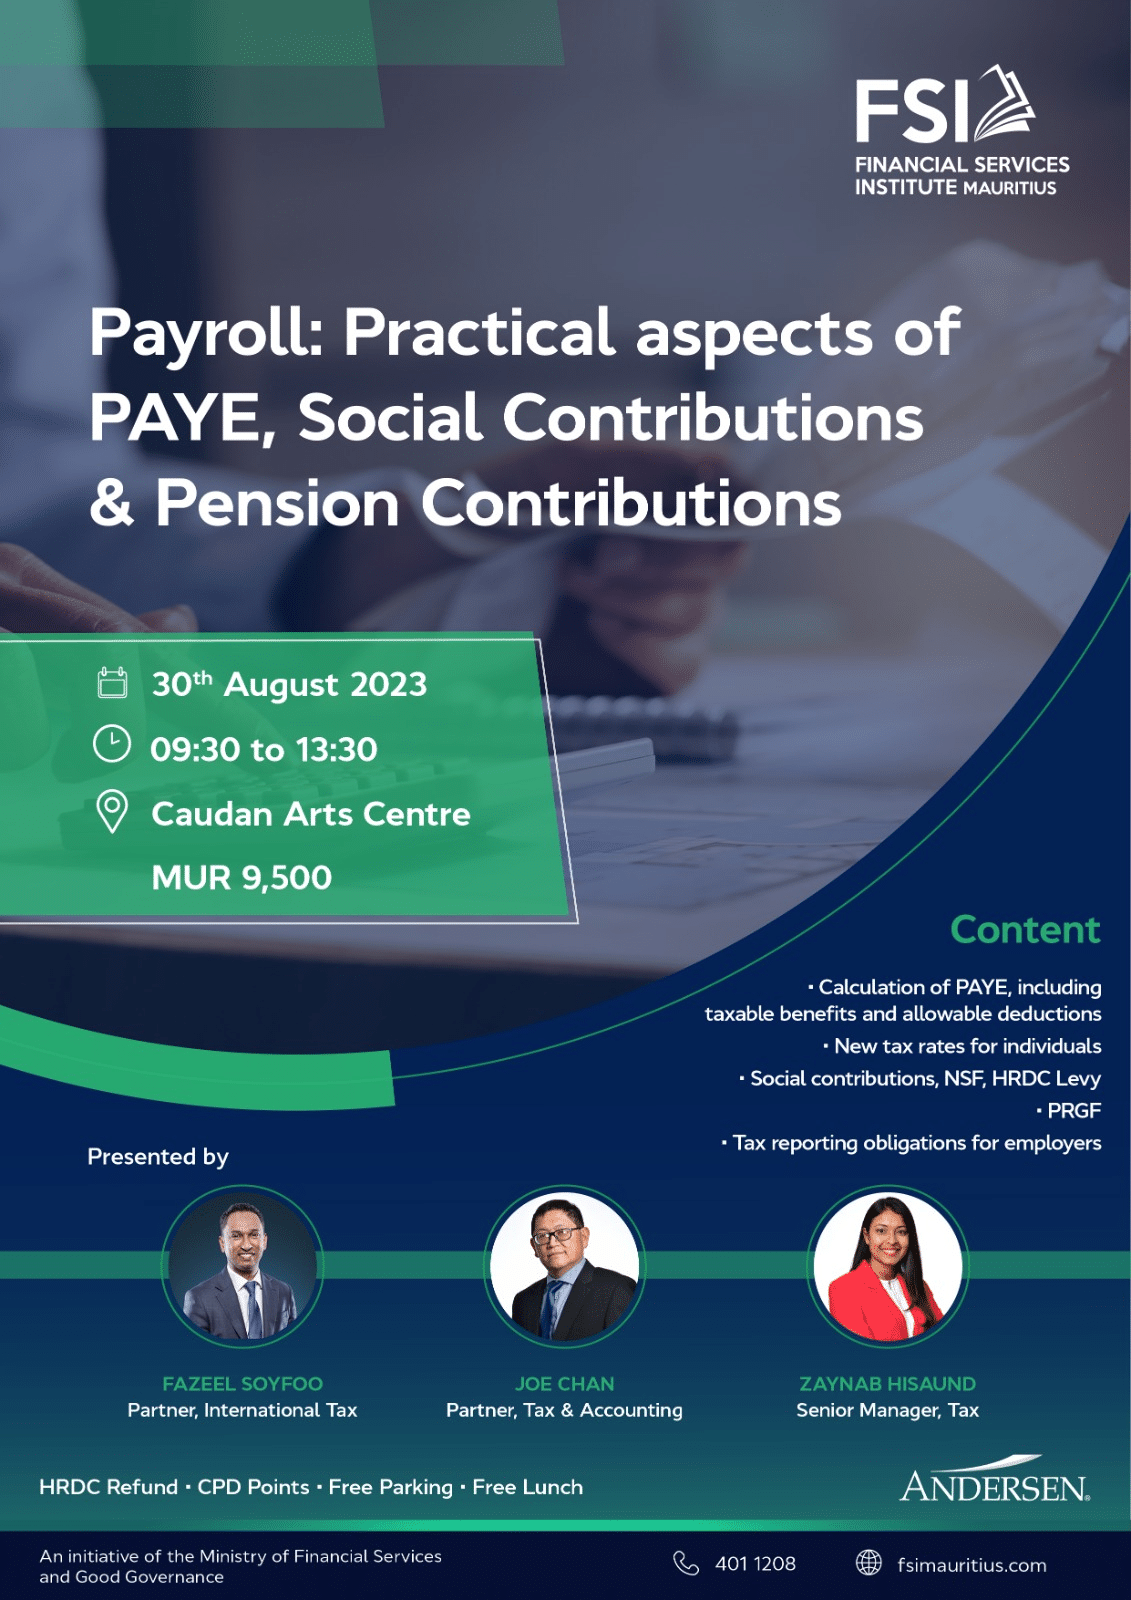 Payroll: Practical aspects of PAYE, Social Contributions & Pension Contributions”